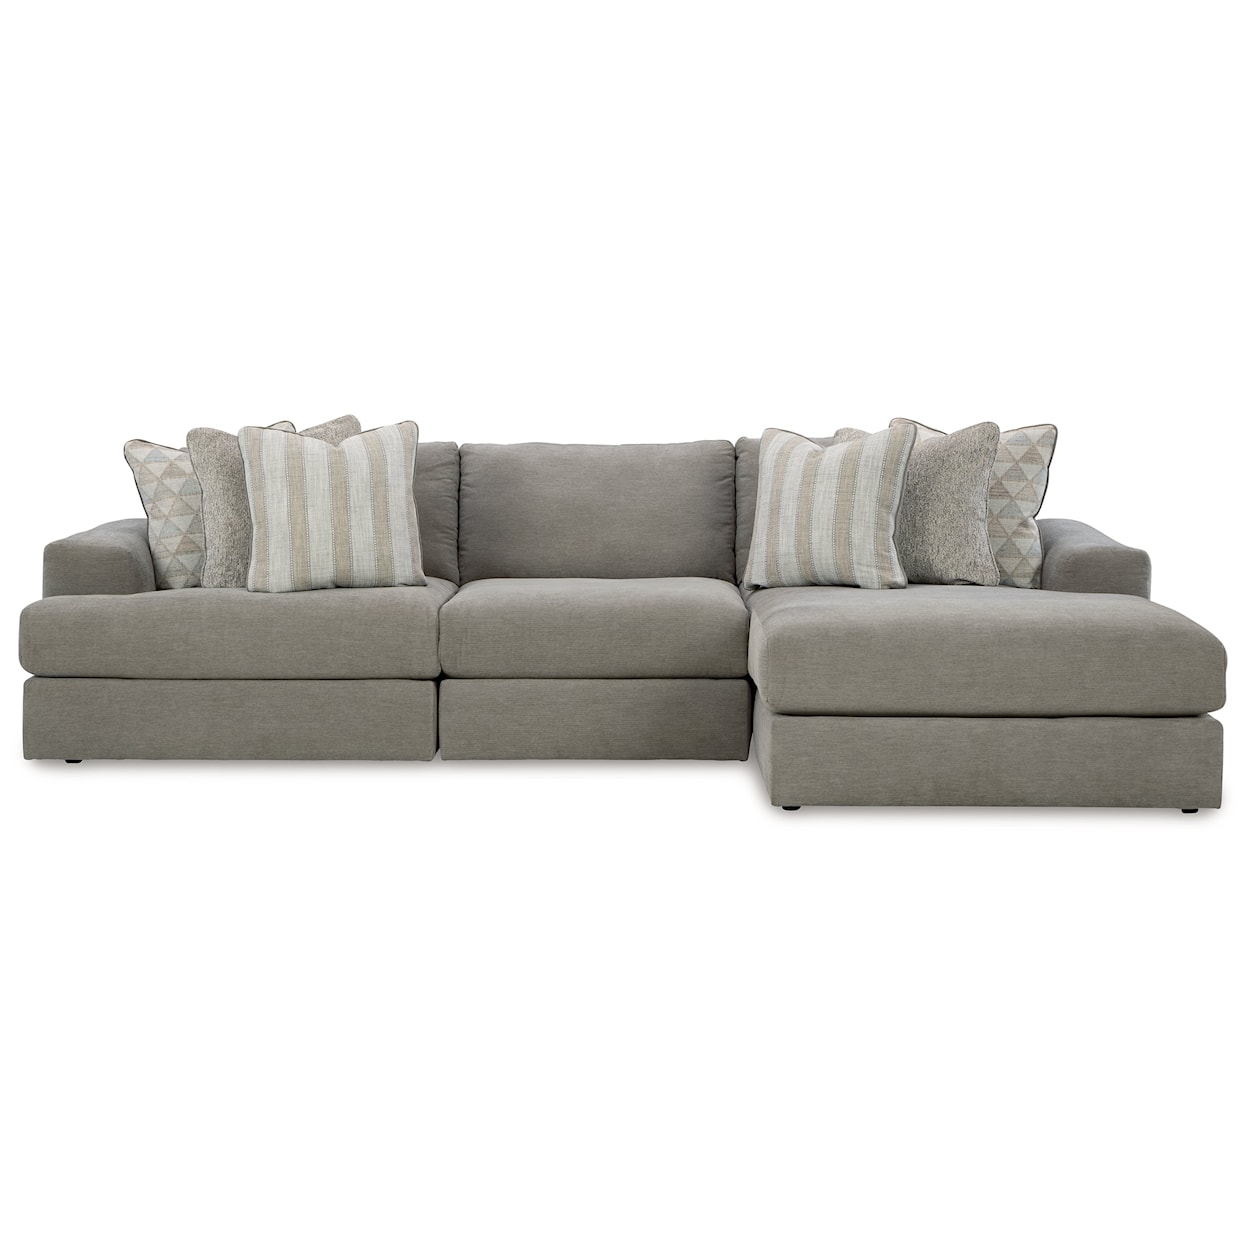 Signature Design by Ashley Avaliyah 3-Piece Sectional